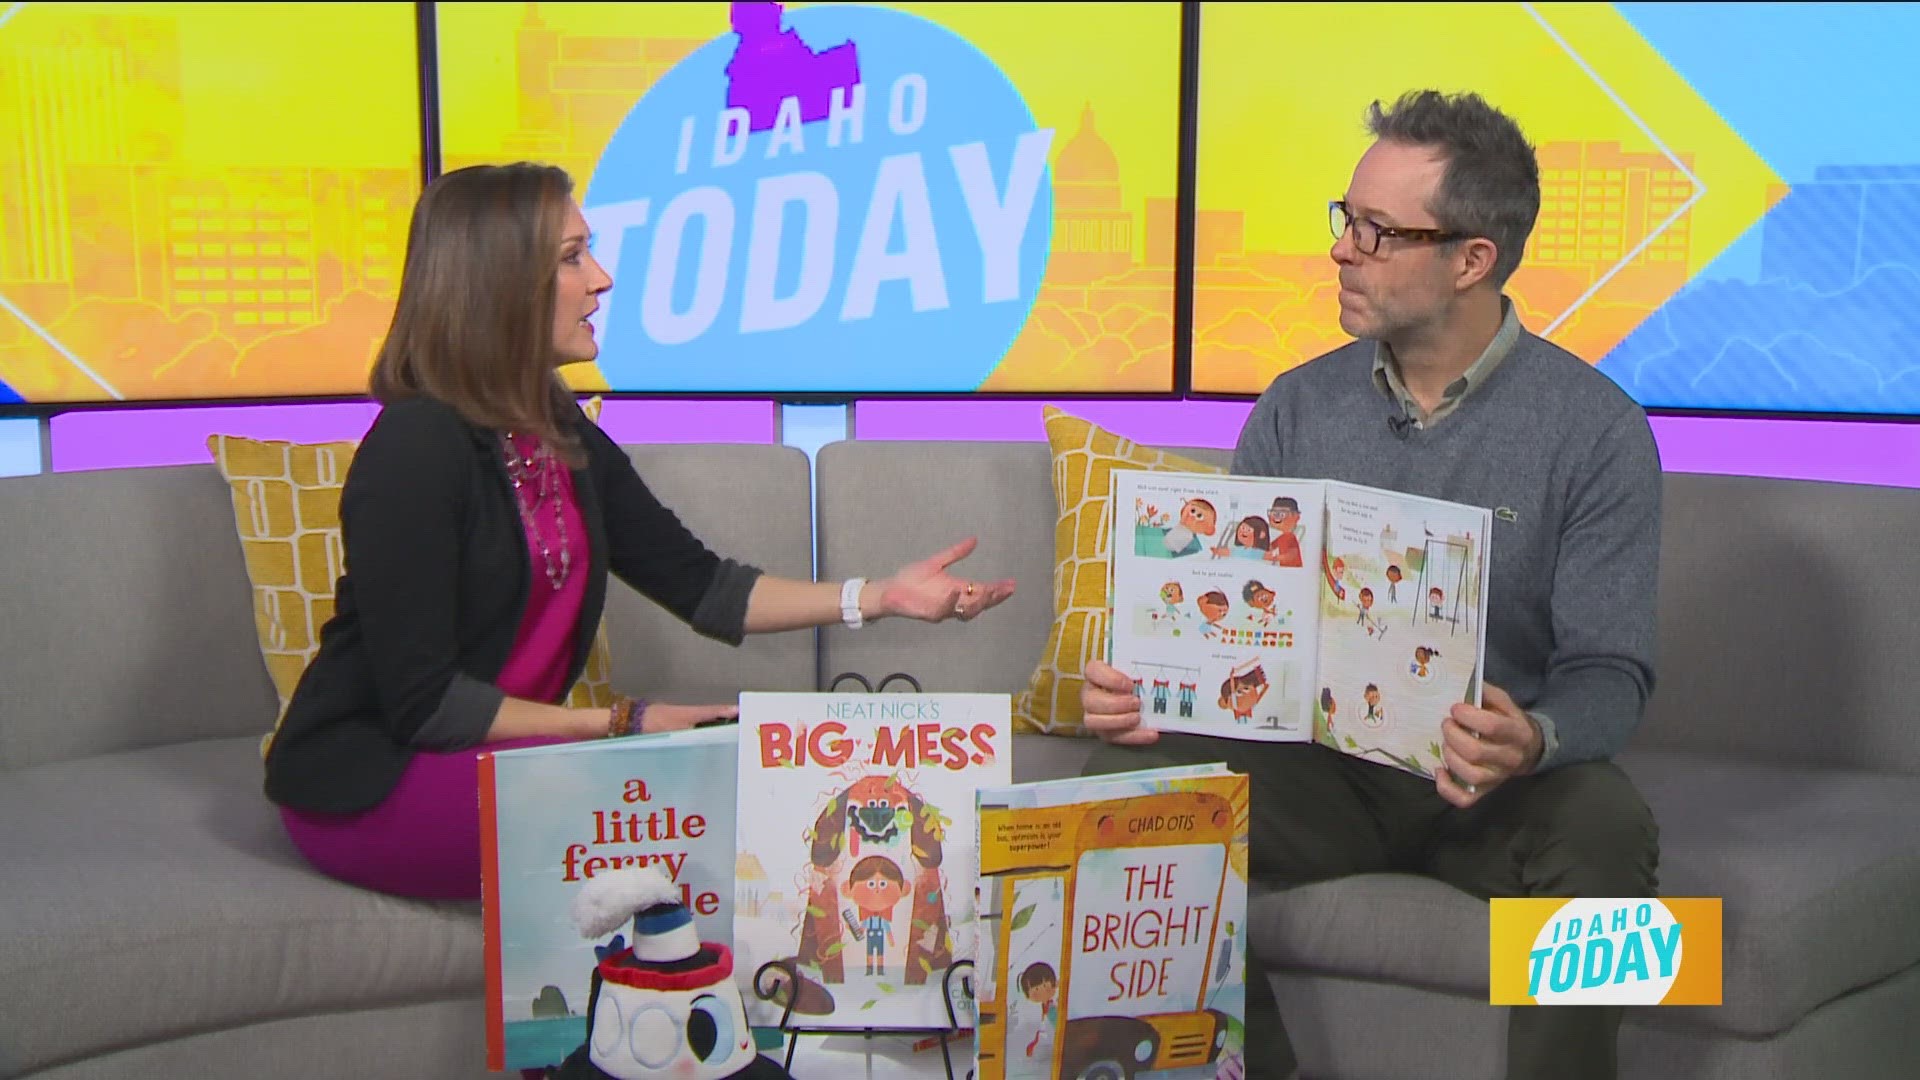 Chad Otis has shared a few of his children’s books on Idaho Today, some have received national accolades too! Currently, Otis is releasing a new children’s book.